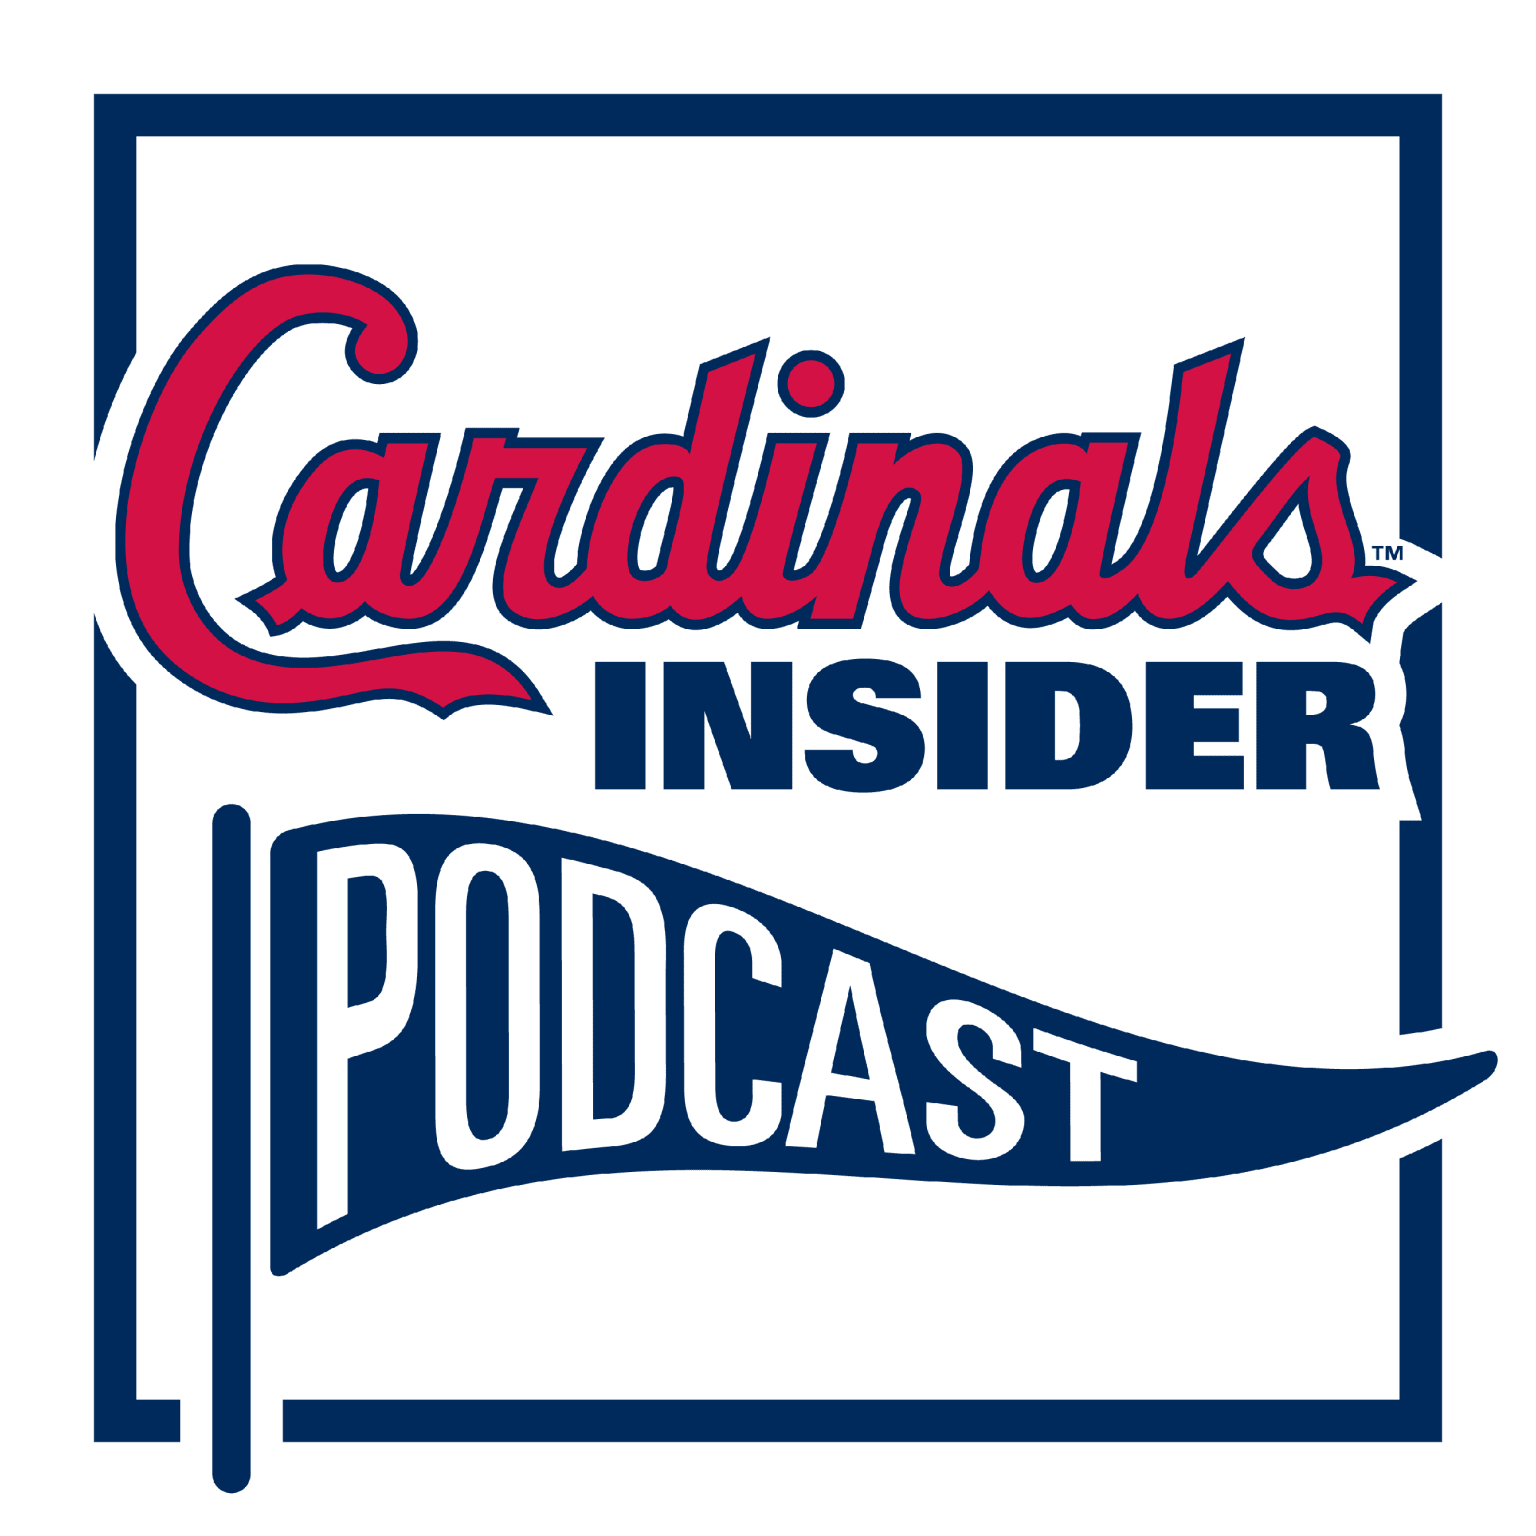 Latest stories published on Cardinals Insider